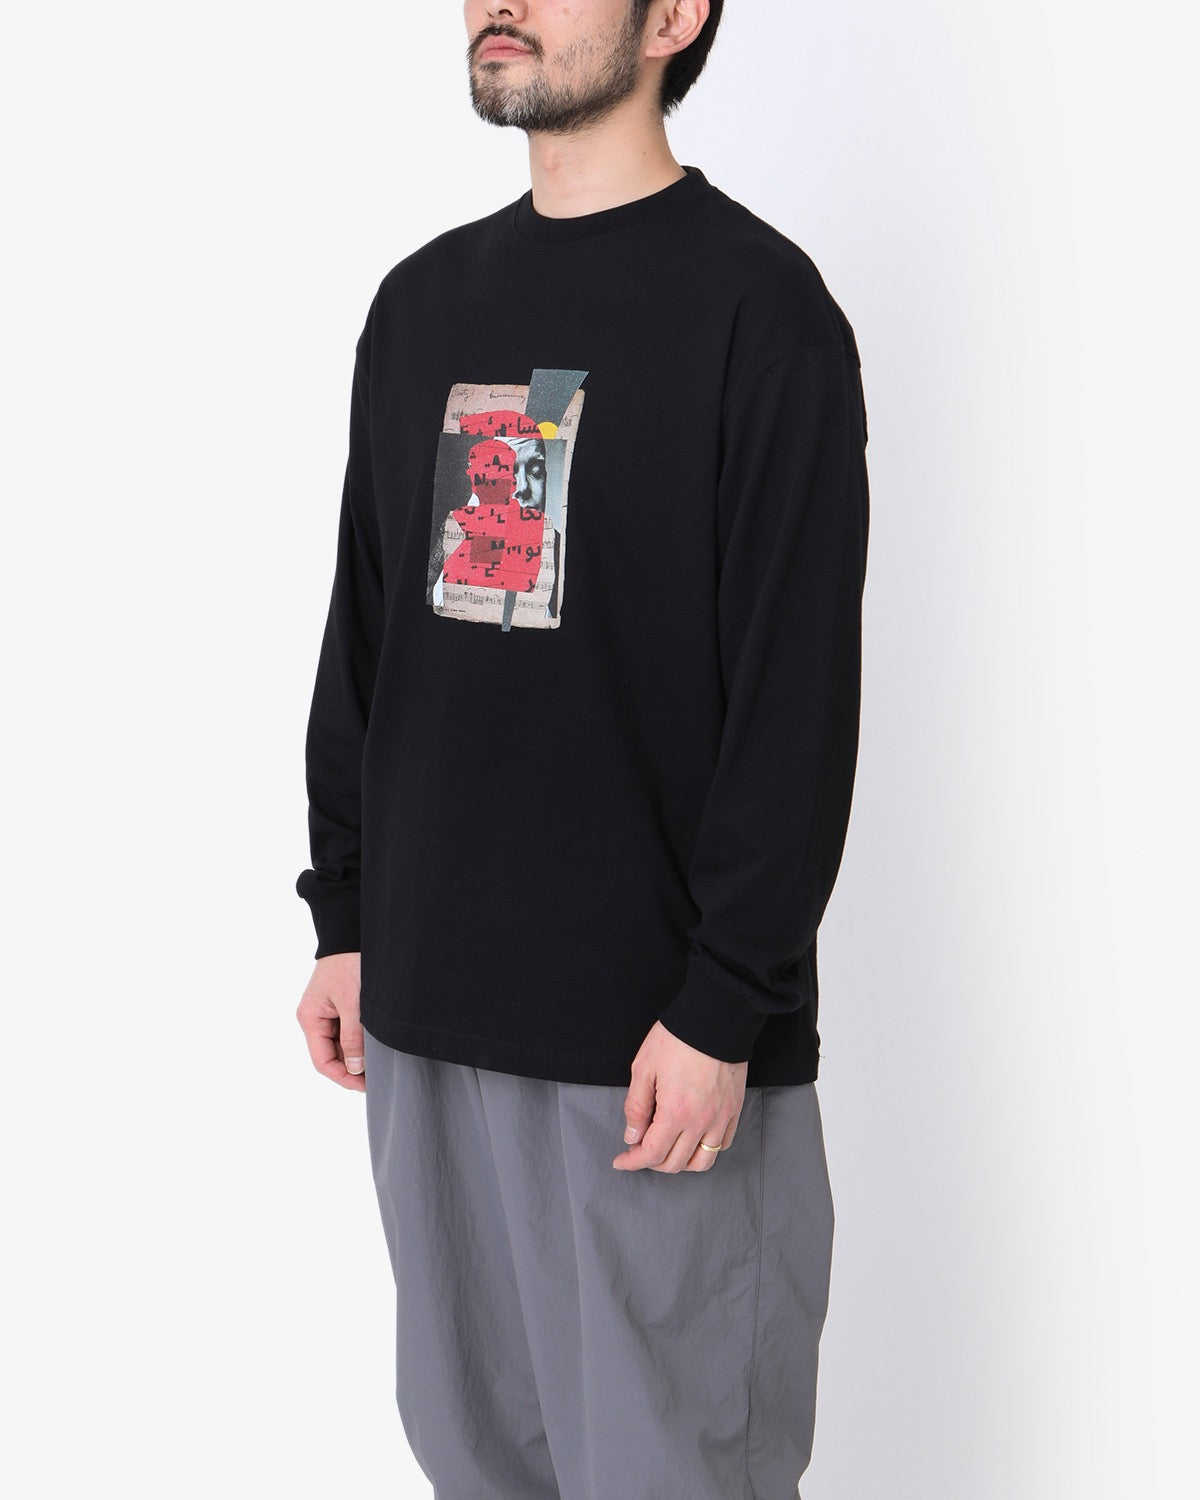 KILLIMAN JAH LOW WORKS COLLAGE 01 LONG SLEEVE T-SHIRT